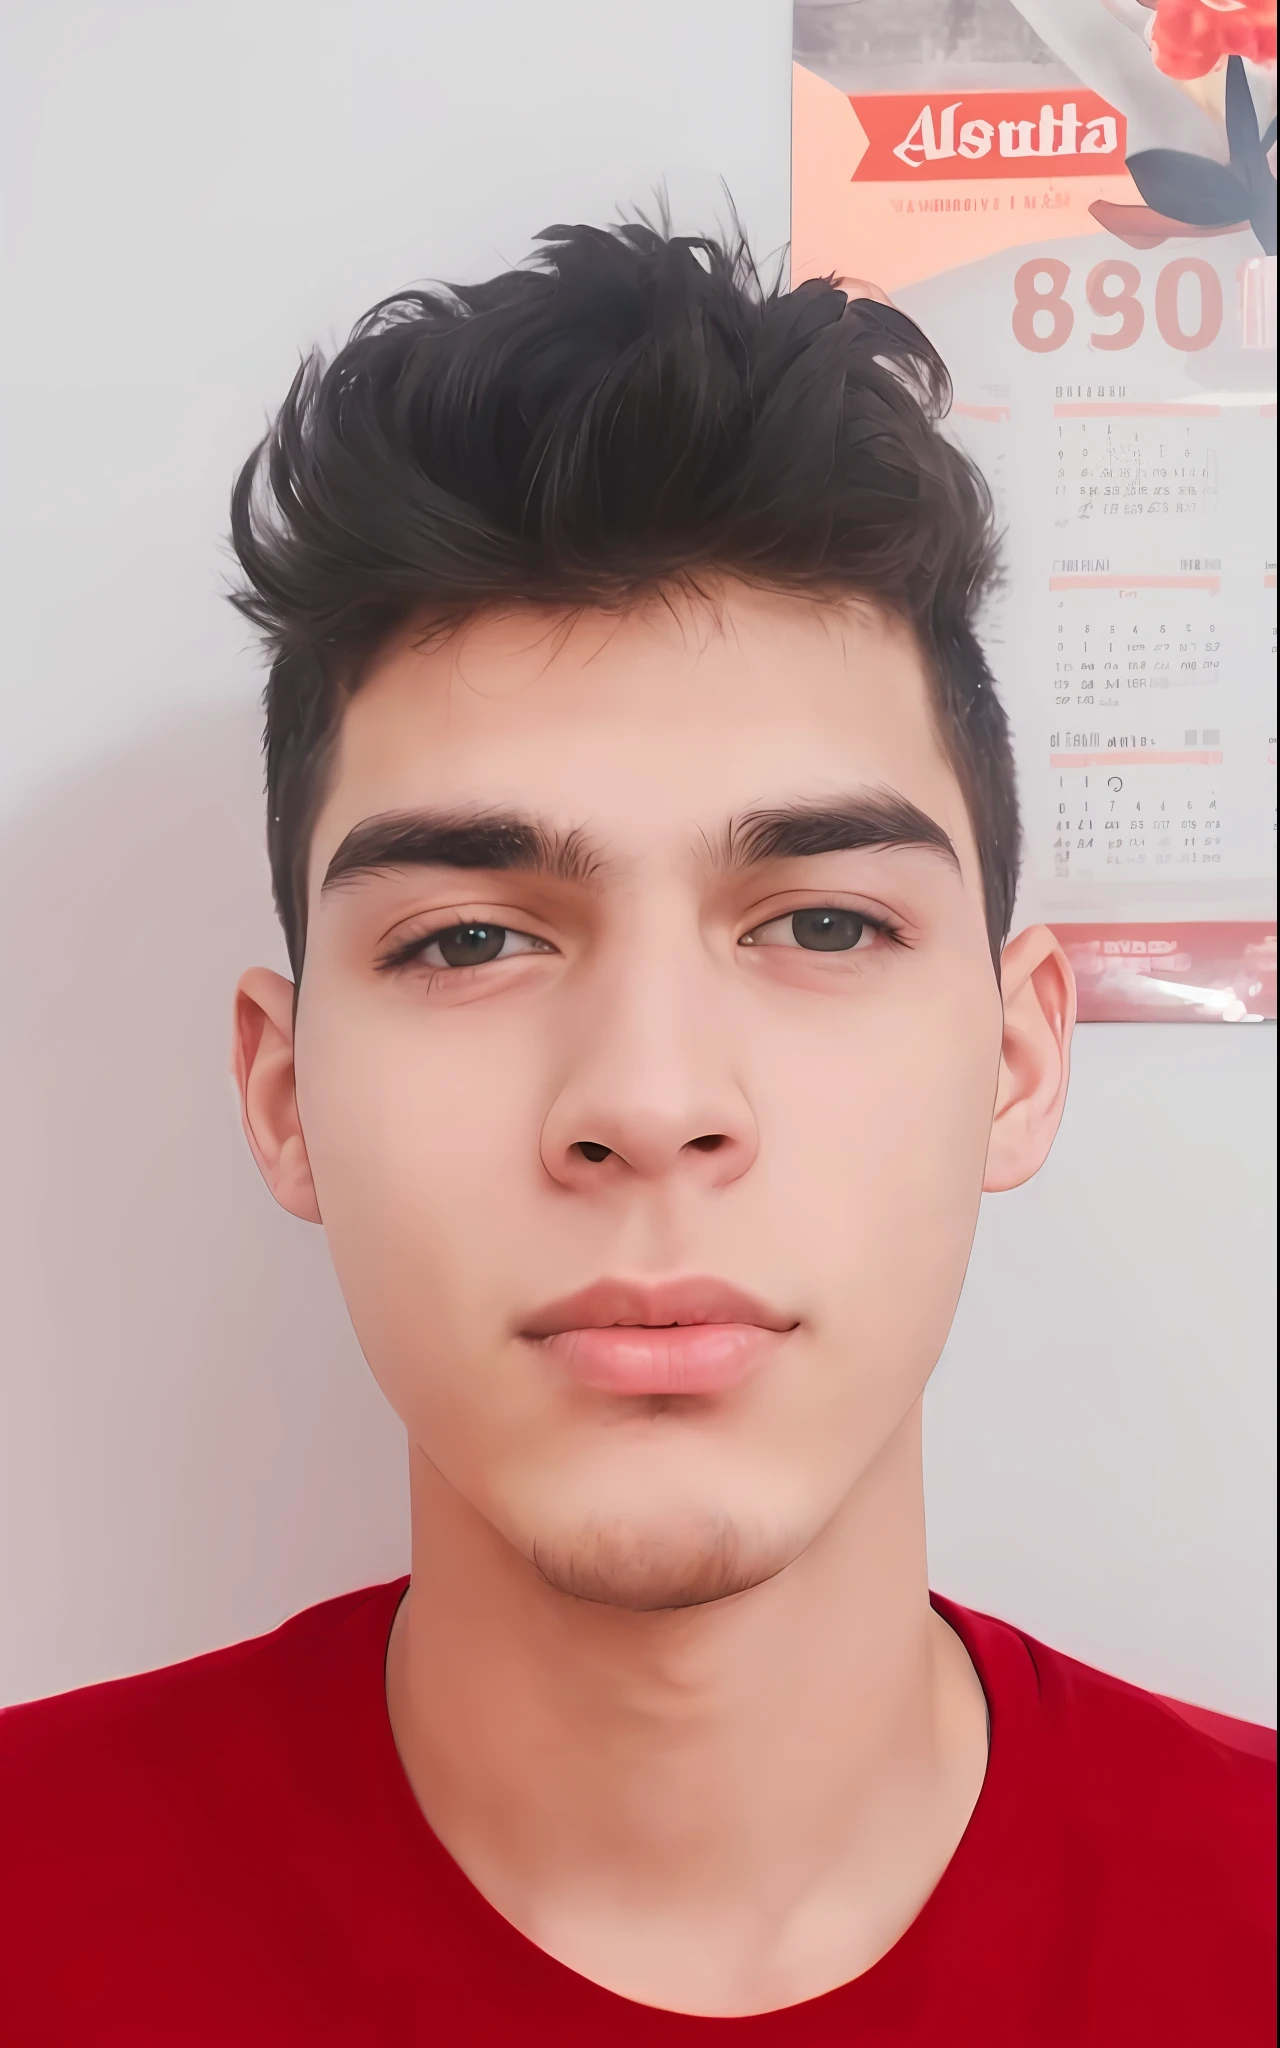 (8K, foto RAW, best qualityer, Masterpiece artwork: 1.2), (realisitic, fotorrealisitic:
a close up of a person with a red shirt and a calendar, imagem front-facing, Matthew 9 5, caio santos, around 1 9 years old, 18-years old, perfil front-facing!!!!, tommy 1 6 years old de idade, 1 6 years old, front-facing, youthful face, male teen, Foto realisitic, face perfect ), clean shaven face